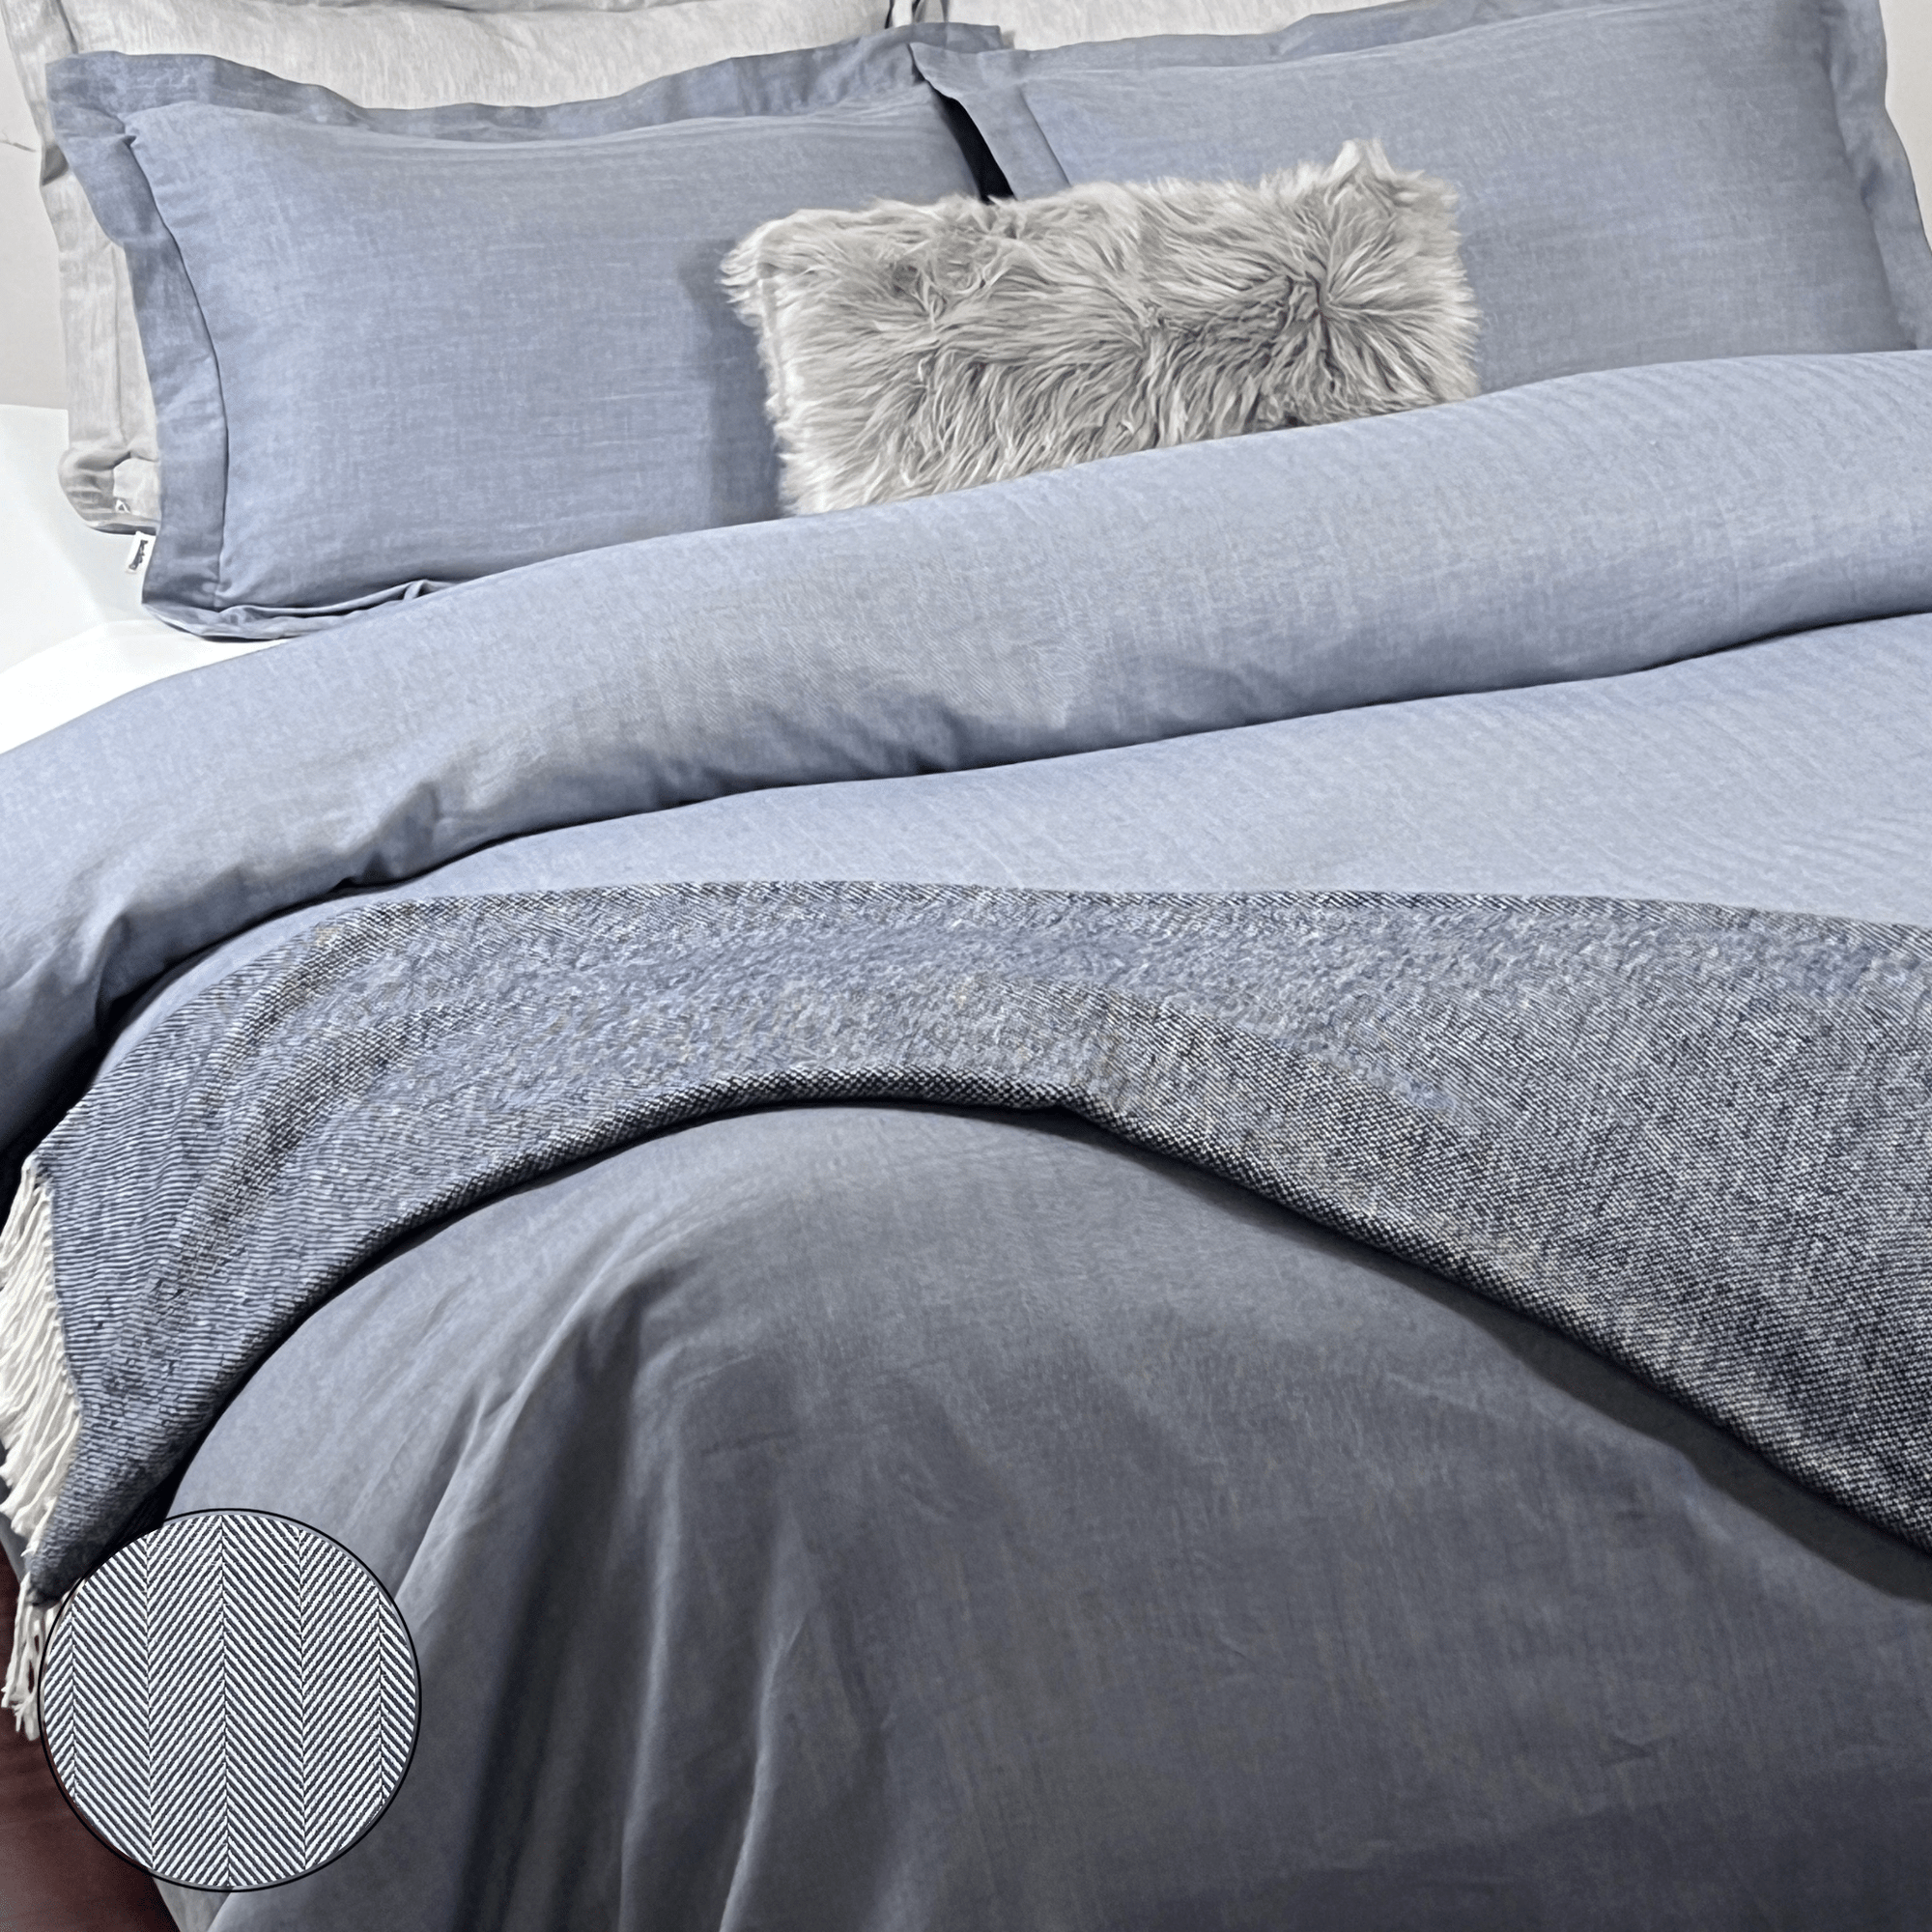 beddley Z-Copy of Herringbone Easy-Change™ Duvet Cover with three sided open easycare zipper